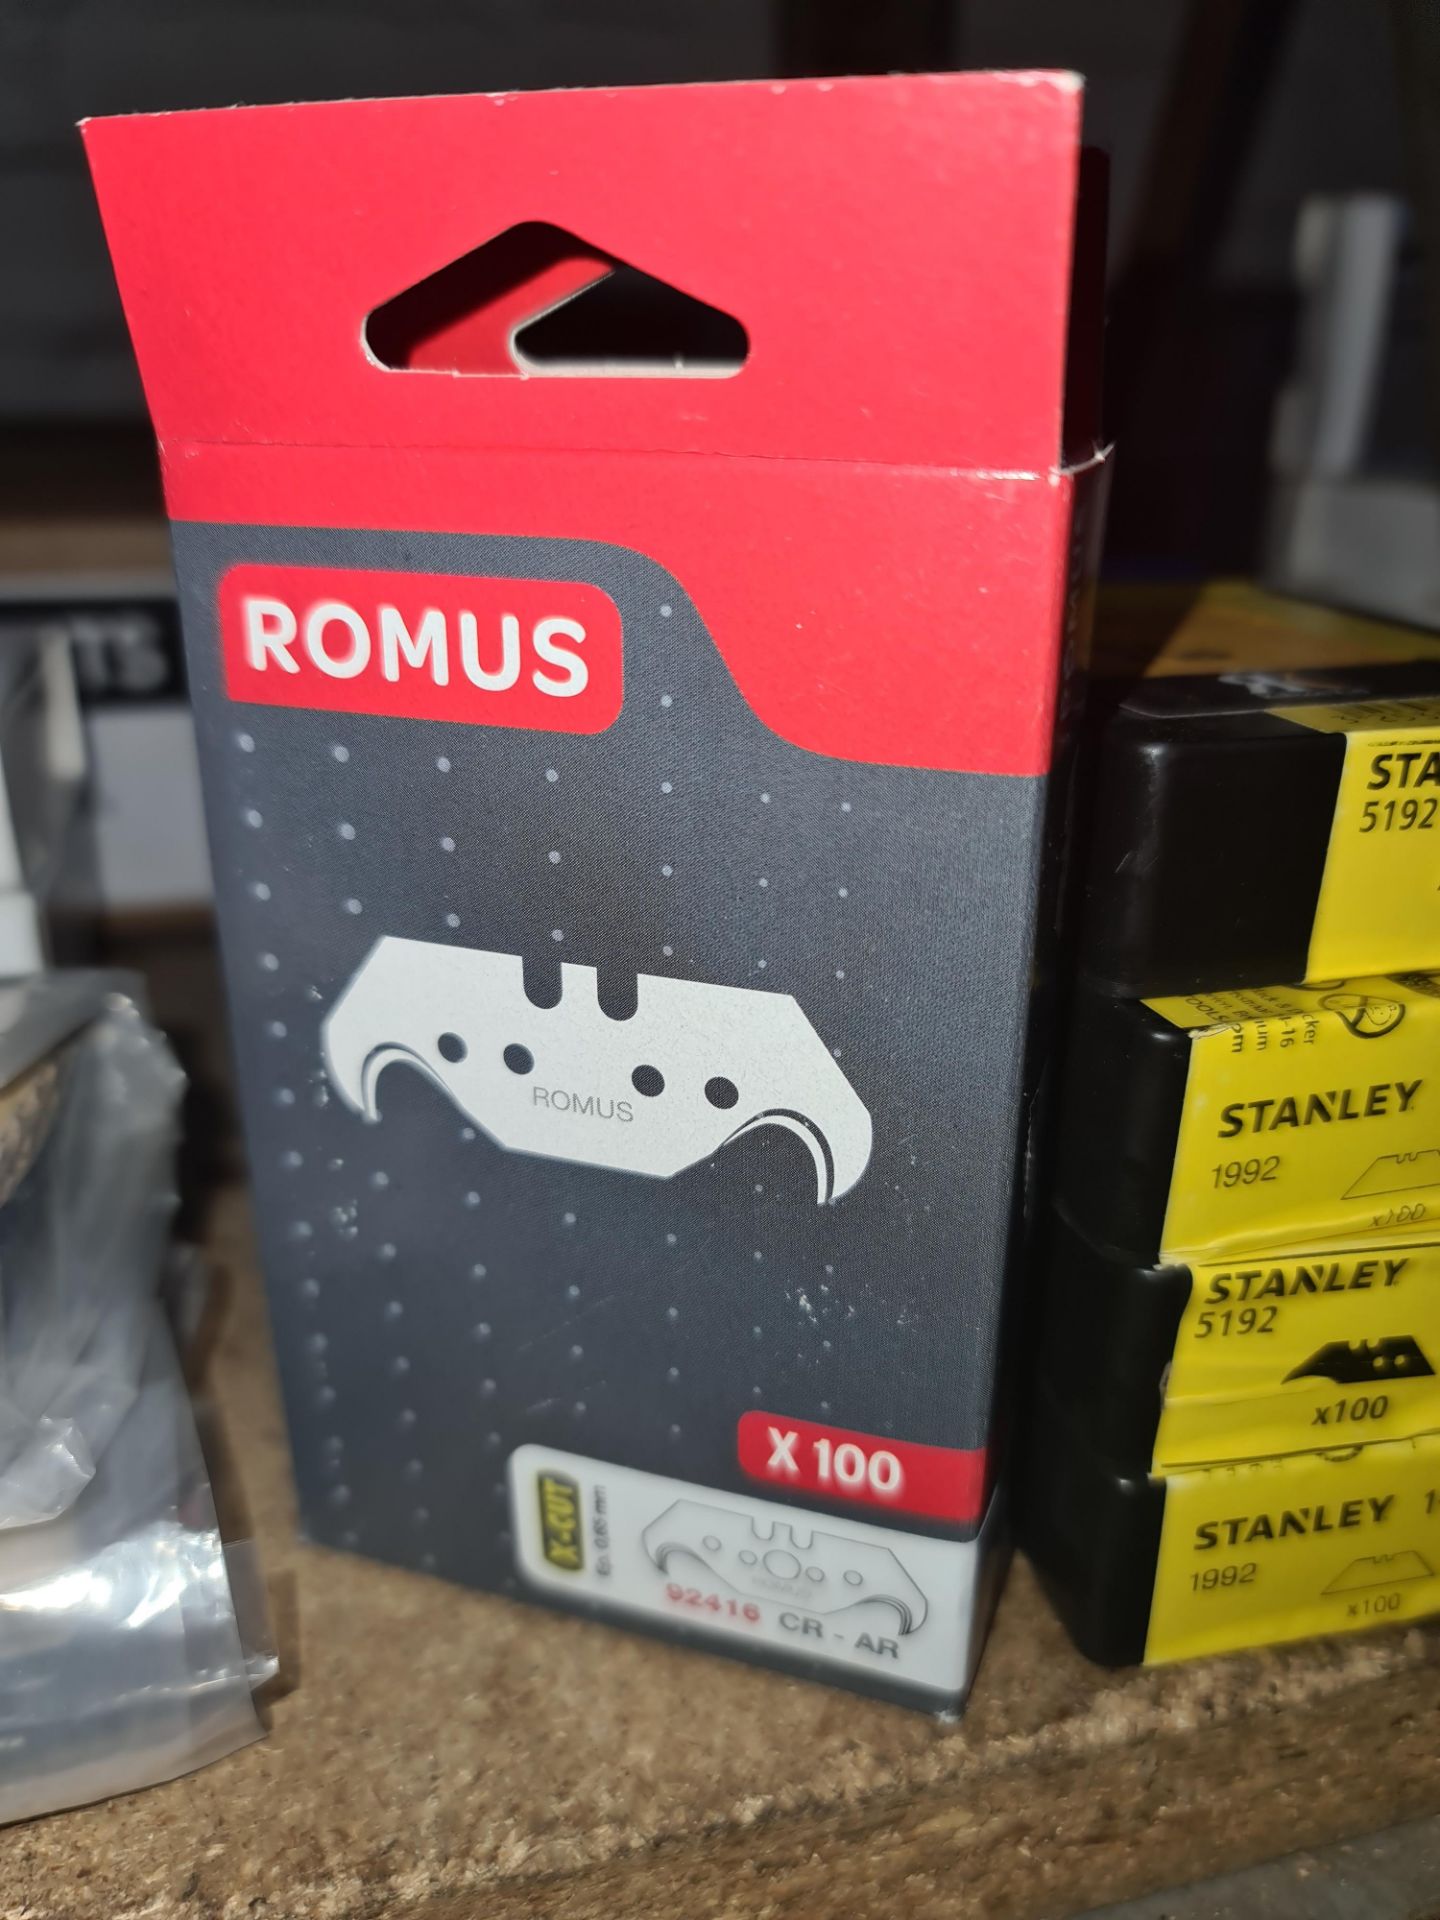 4 boxes of Romus blades, product code 92416Lots 31 - 328 comprise the total assets of a flooring - Image 2 of 2